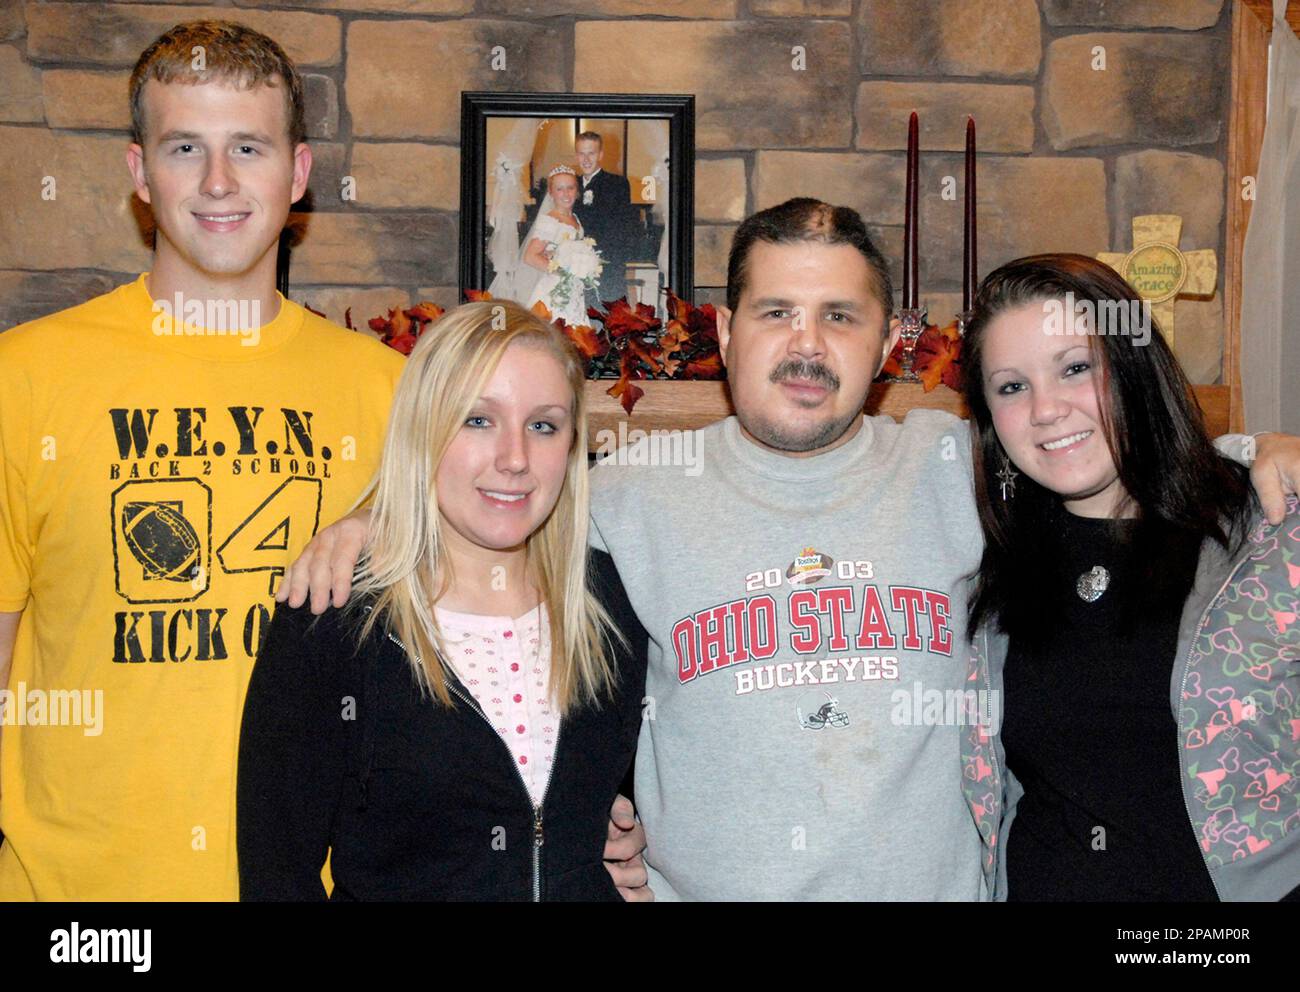 ** FILE ** In this Nov. 24, 2007, file photo, the Rev. Mark Petric, second from right, is shown in Brighton, Ohio with his son-in-law Andy Archer, left, and daughters Heidi Archer and Holly Petric, right. Petric. Lorain County Common Pleas Judge James Burge granted a request by attorneys for Daniel Petric, 16, to grant the boy's father, the Rev. Mark Petric, clergy status at the Lorain County Jail so he can minister to his son. (AP Photo/The Chronicle Telegram, Carl Sullenberger, File) Stock Photo